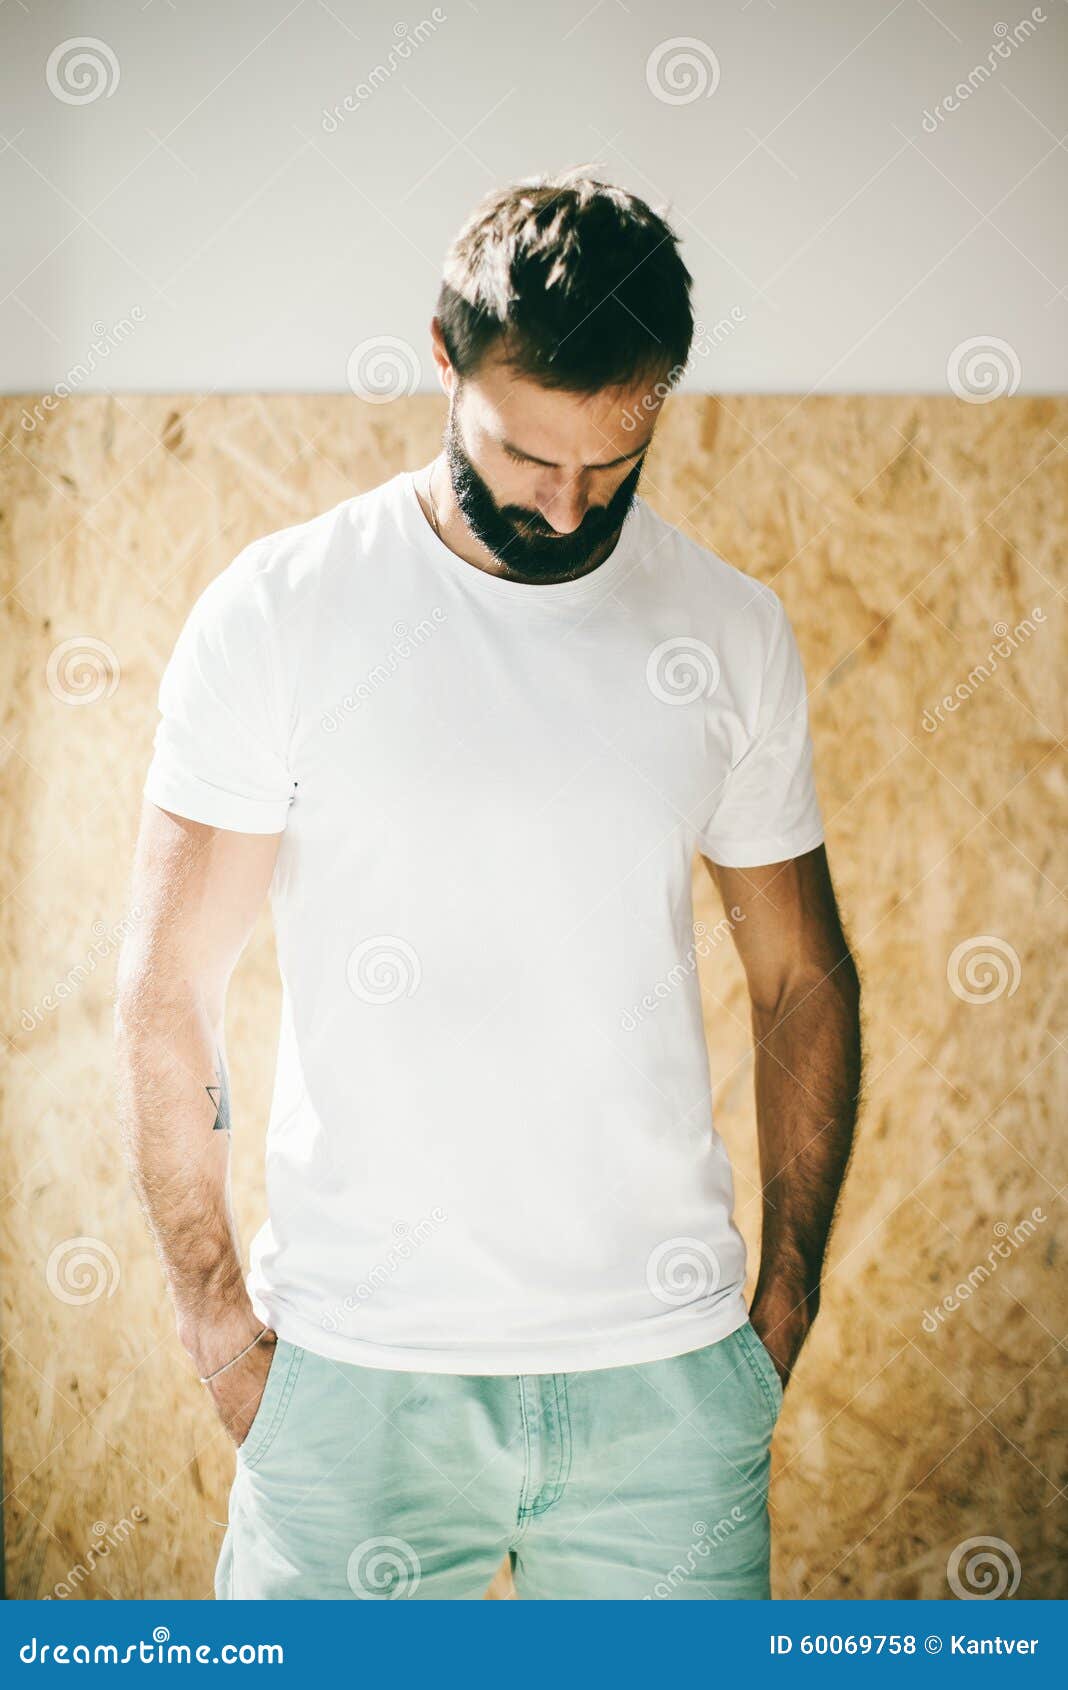 Download Mockup Of A Bearded Man Wearing White Tshirt And Stock Photo Image Of Portrait Cute 60069758